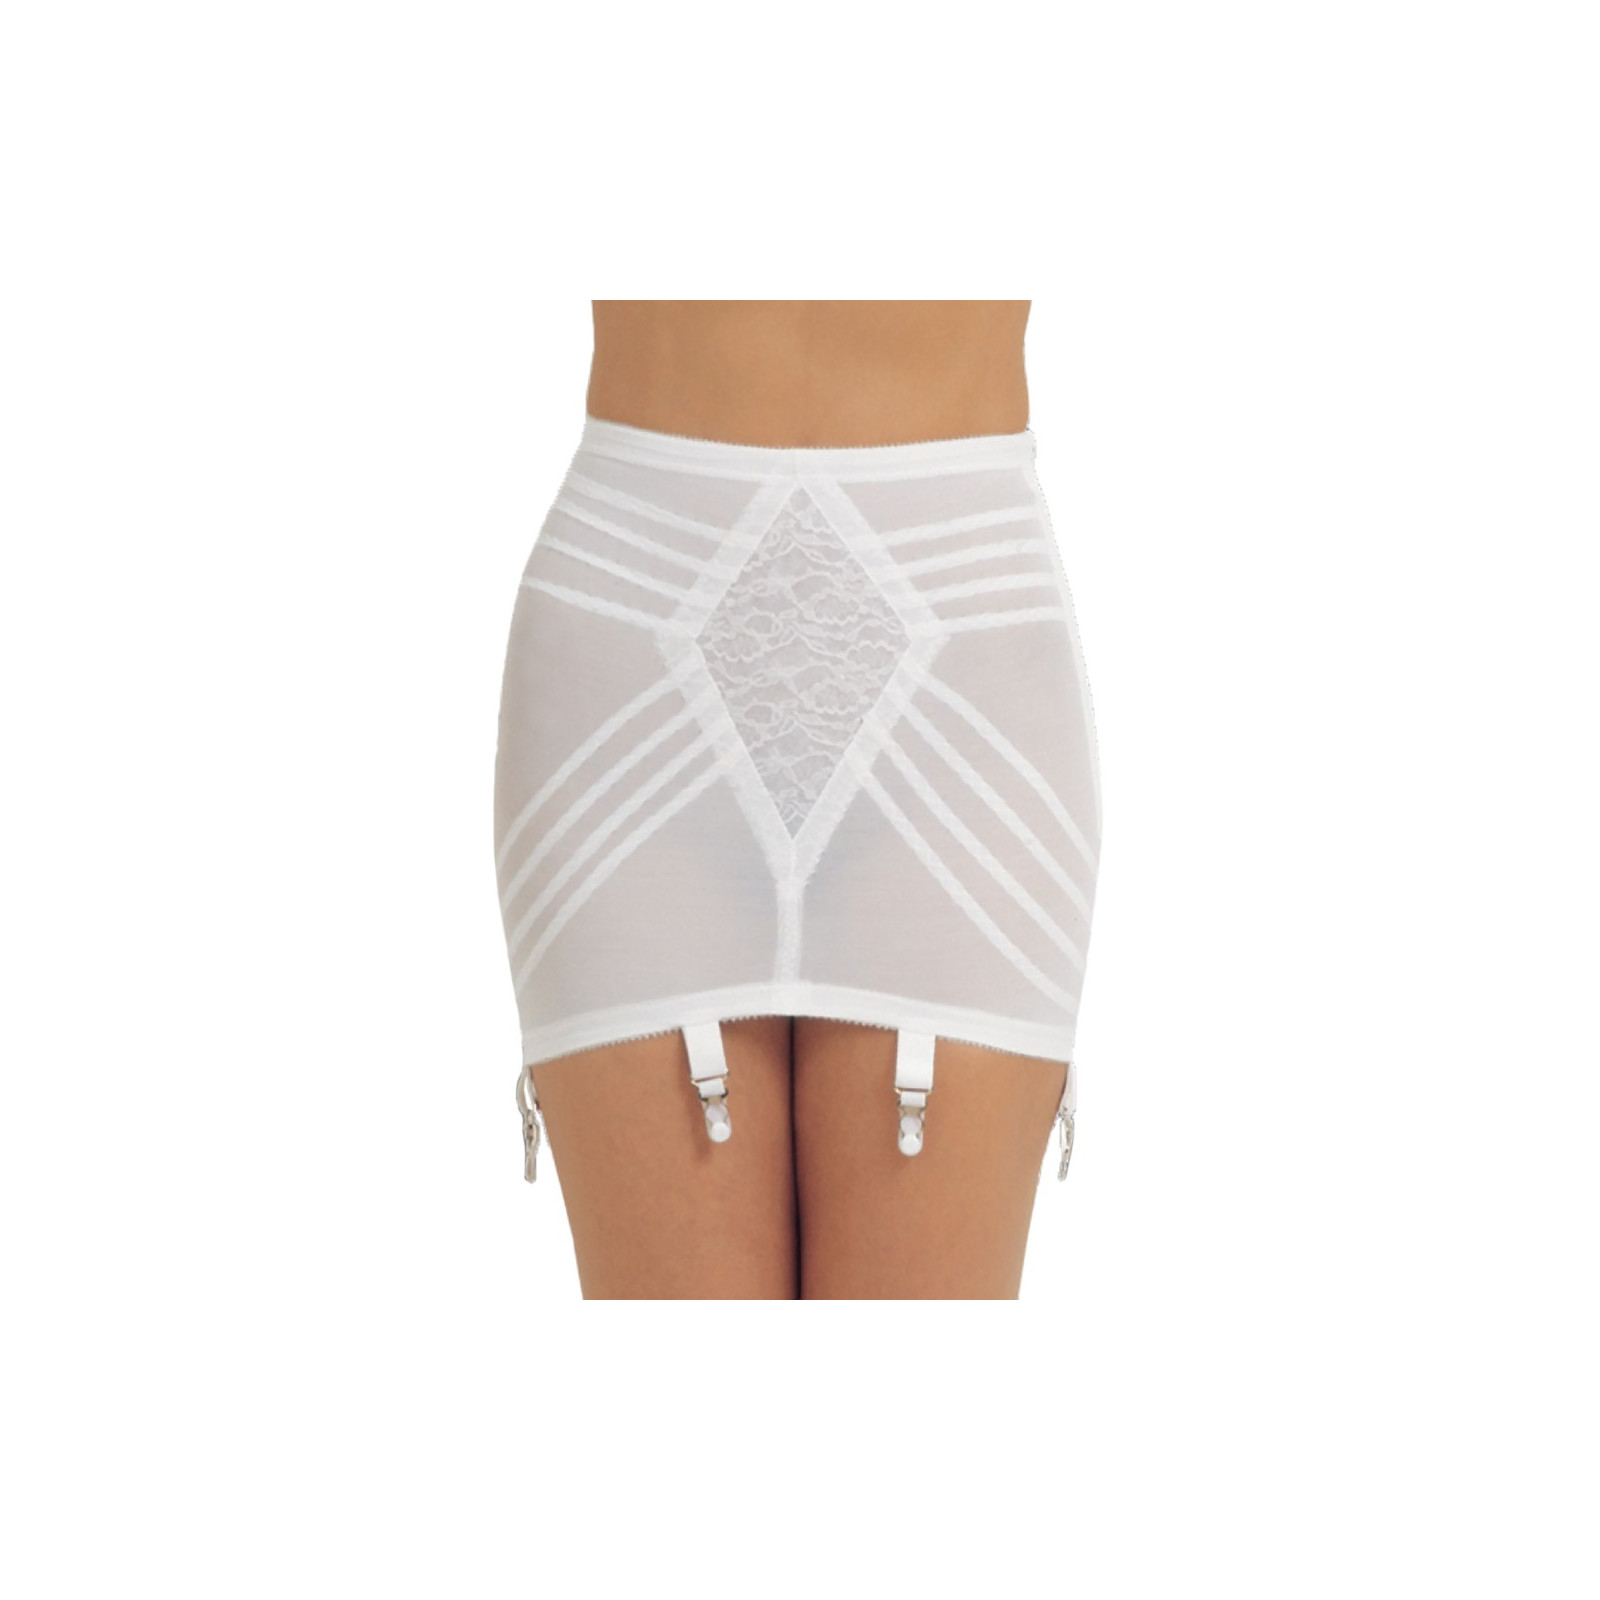 Style 1357, open bottom girdle extra firm shaping